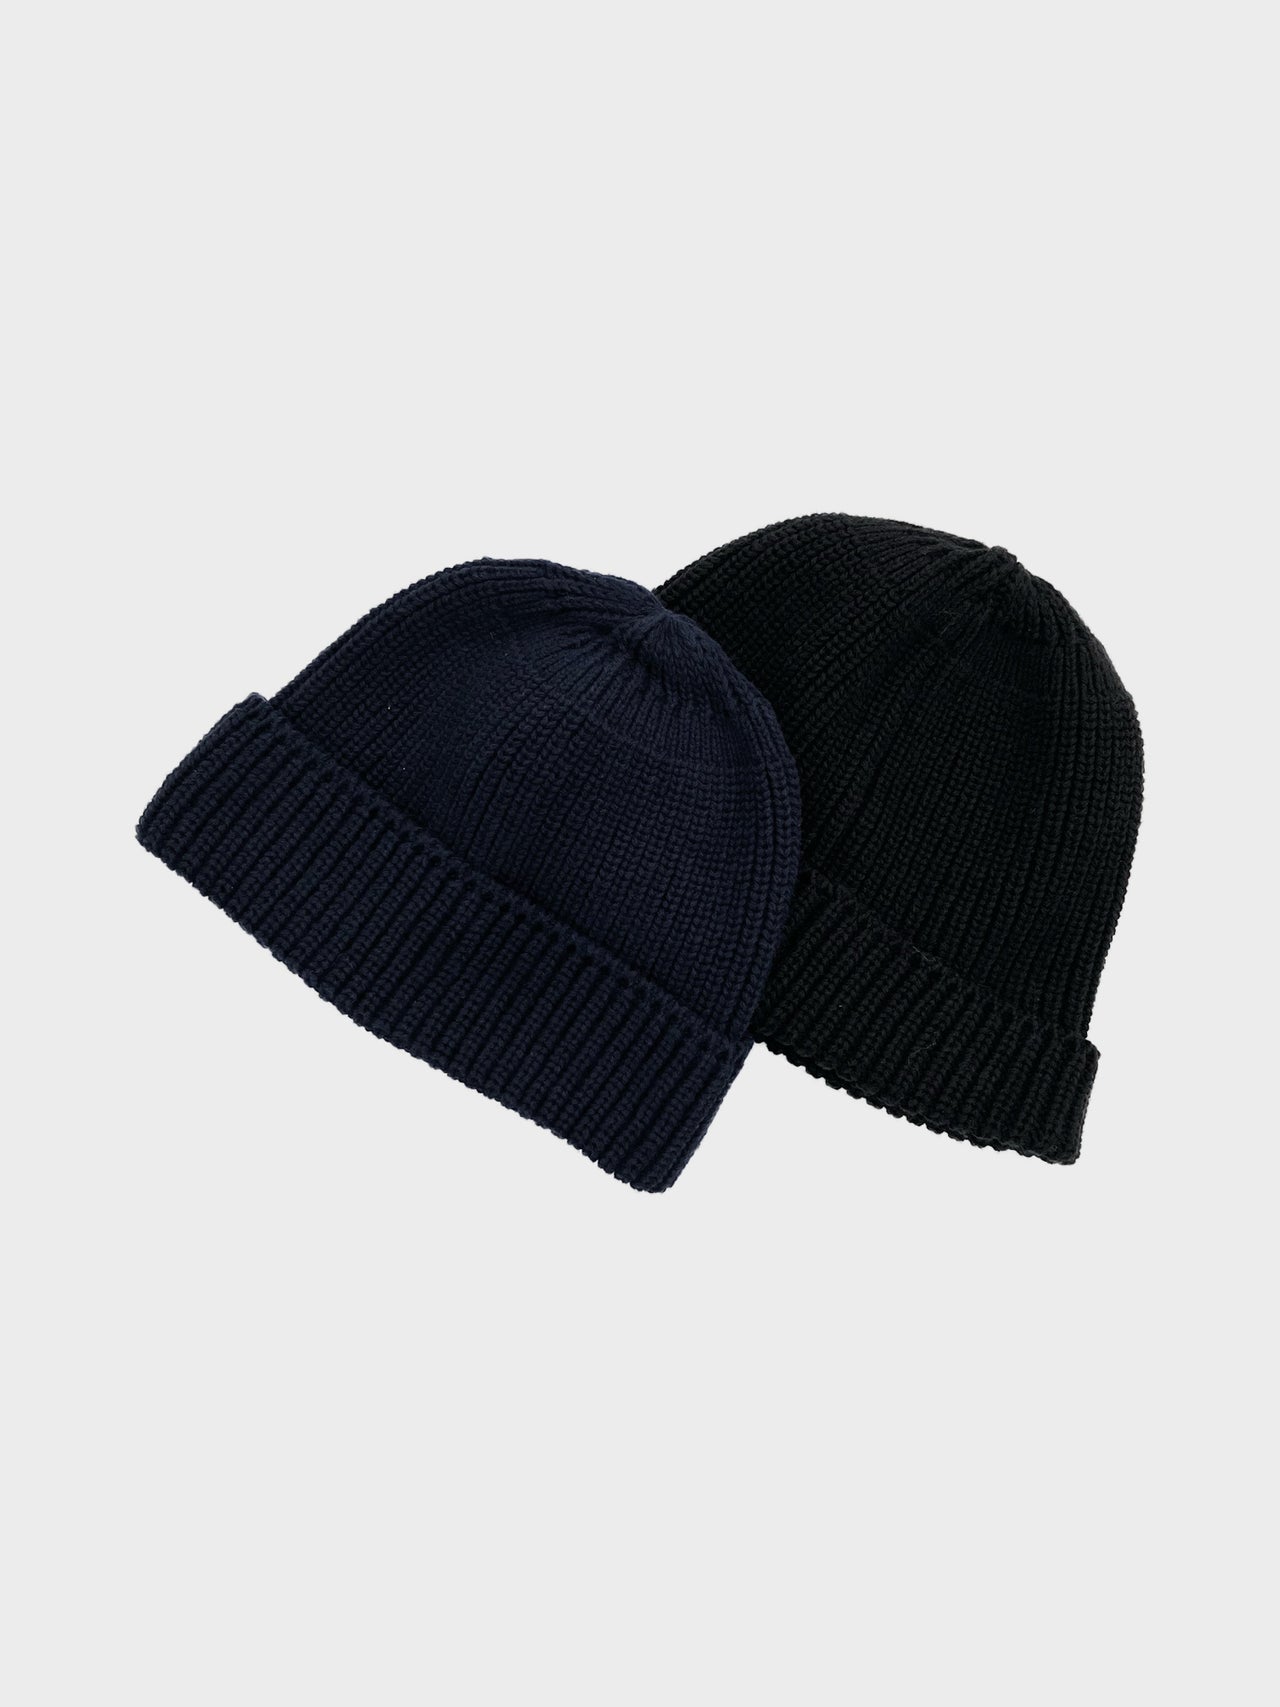 THE DAY / COTTON KNIT CAP (NAVY)